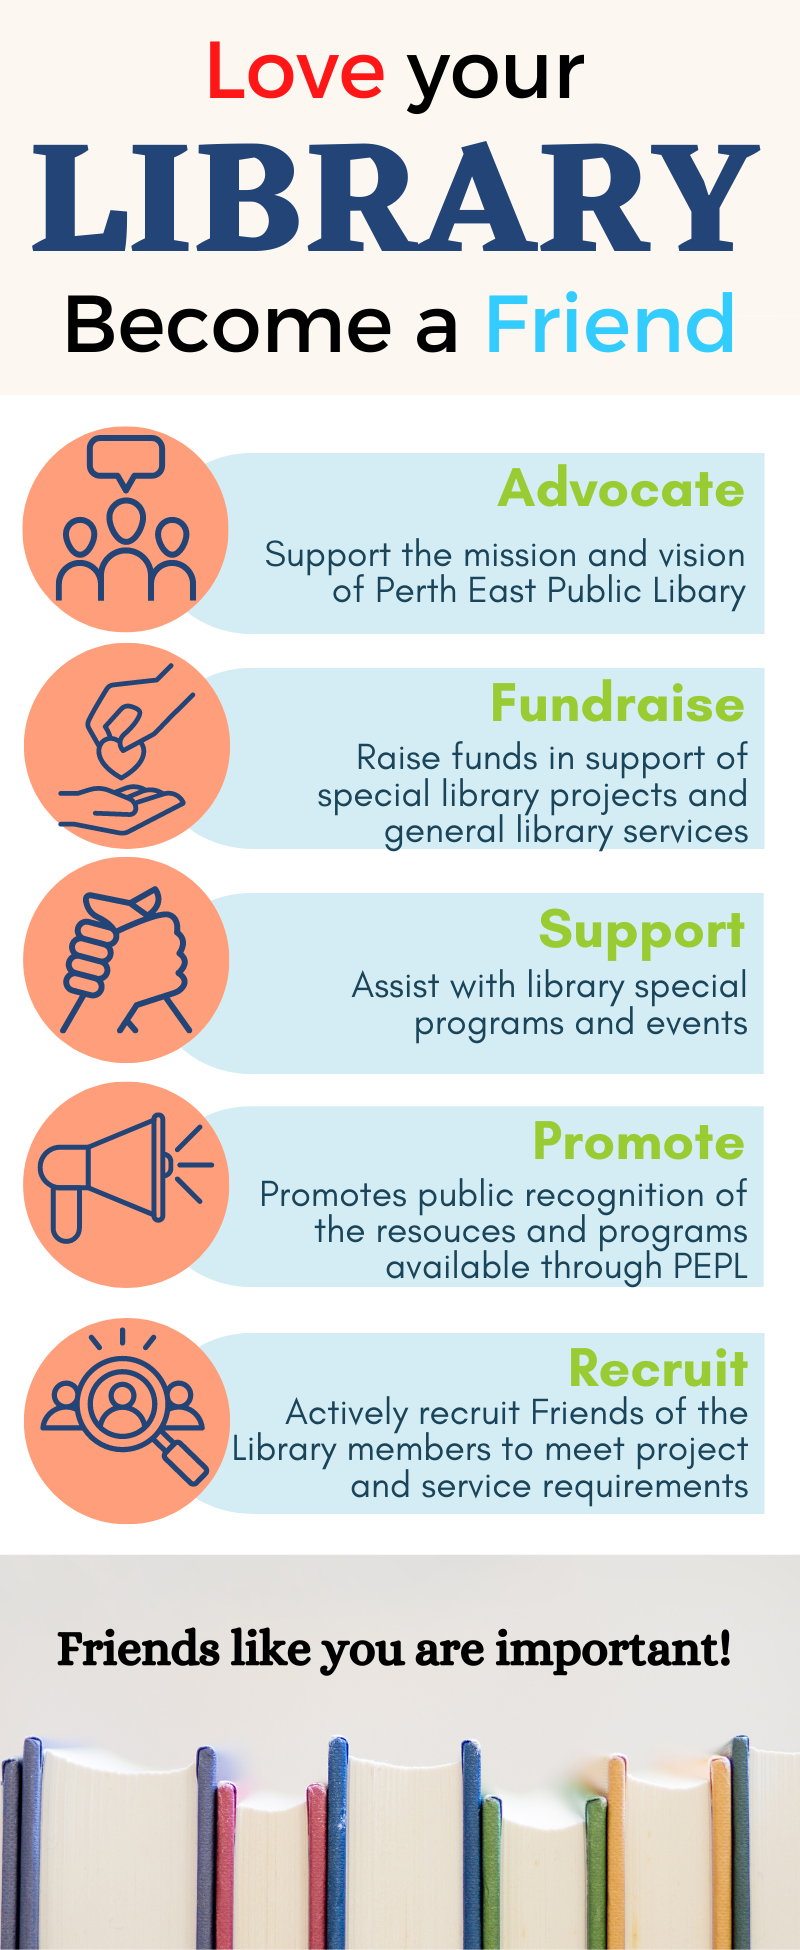 Love your Library Become a Friend: Adcovate, fundraise, support, promote, recruit